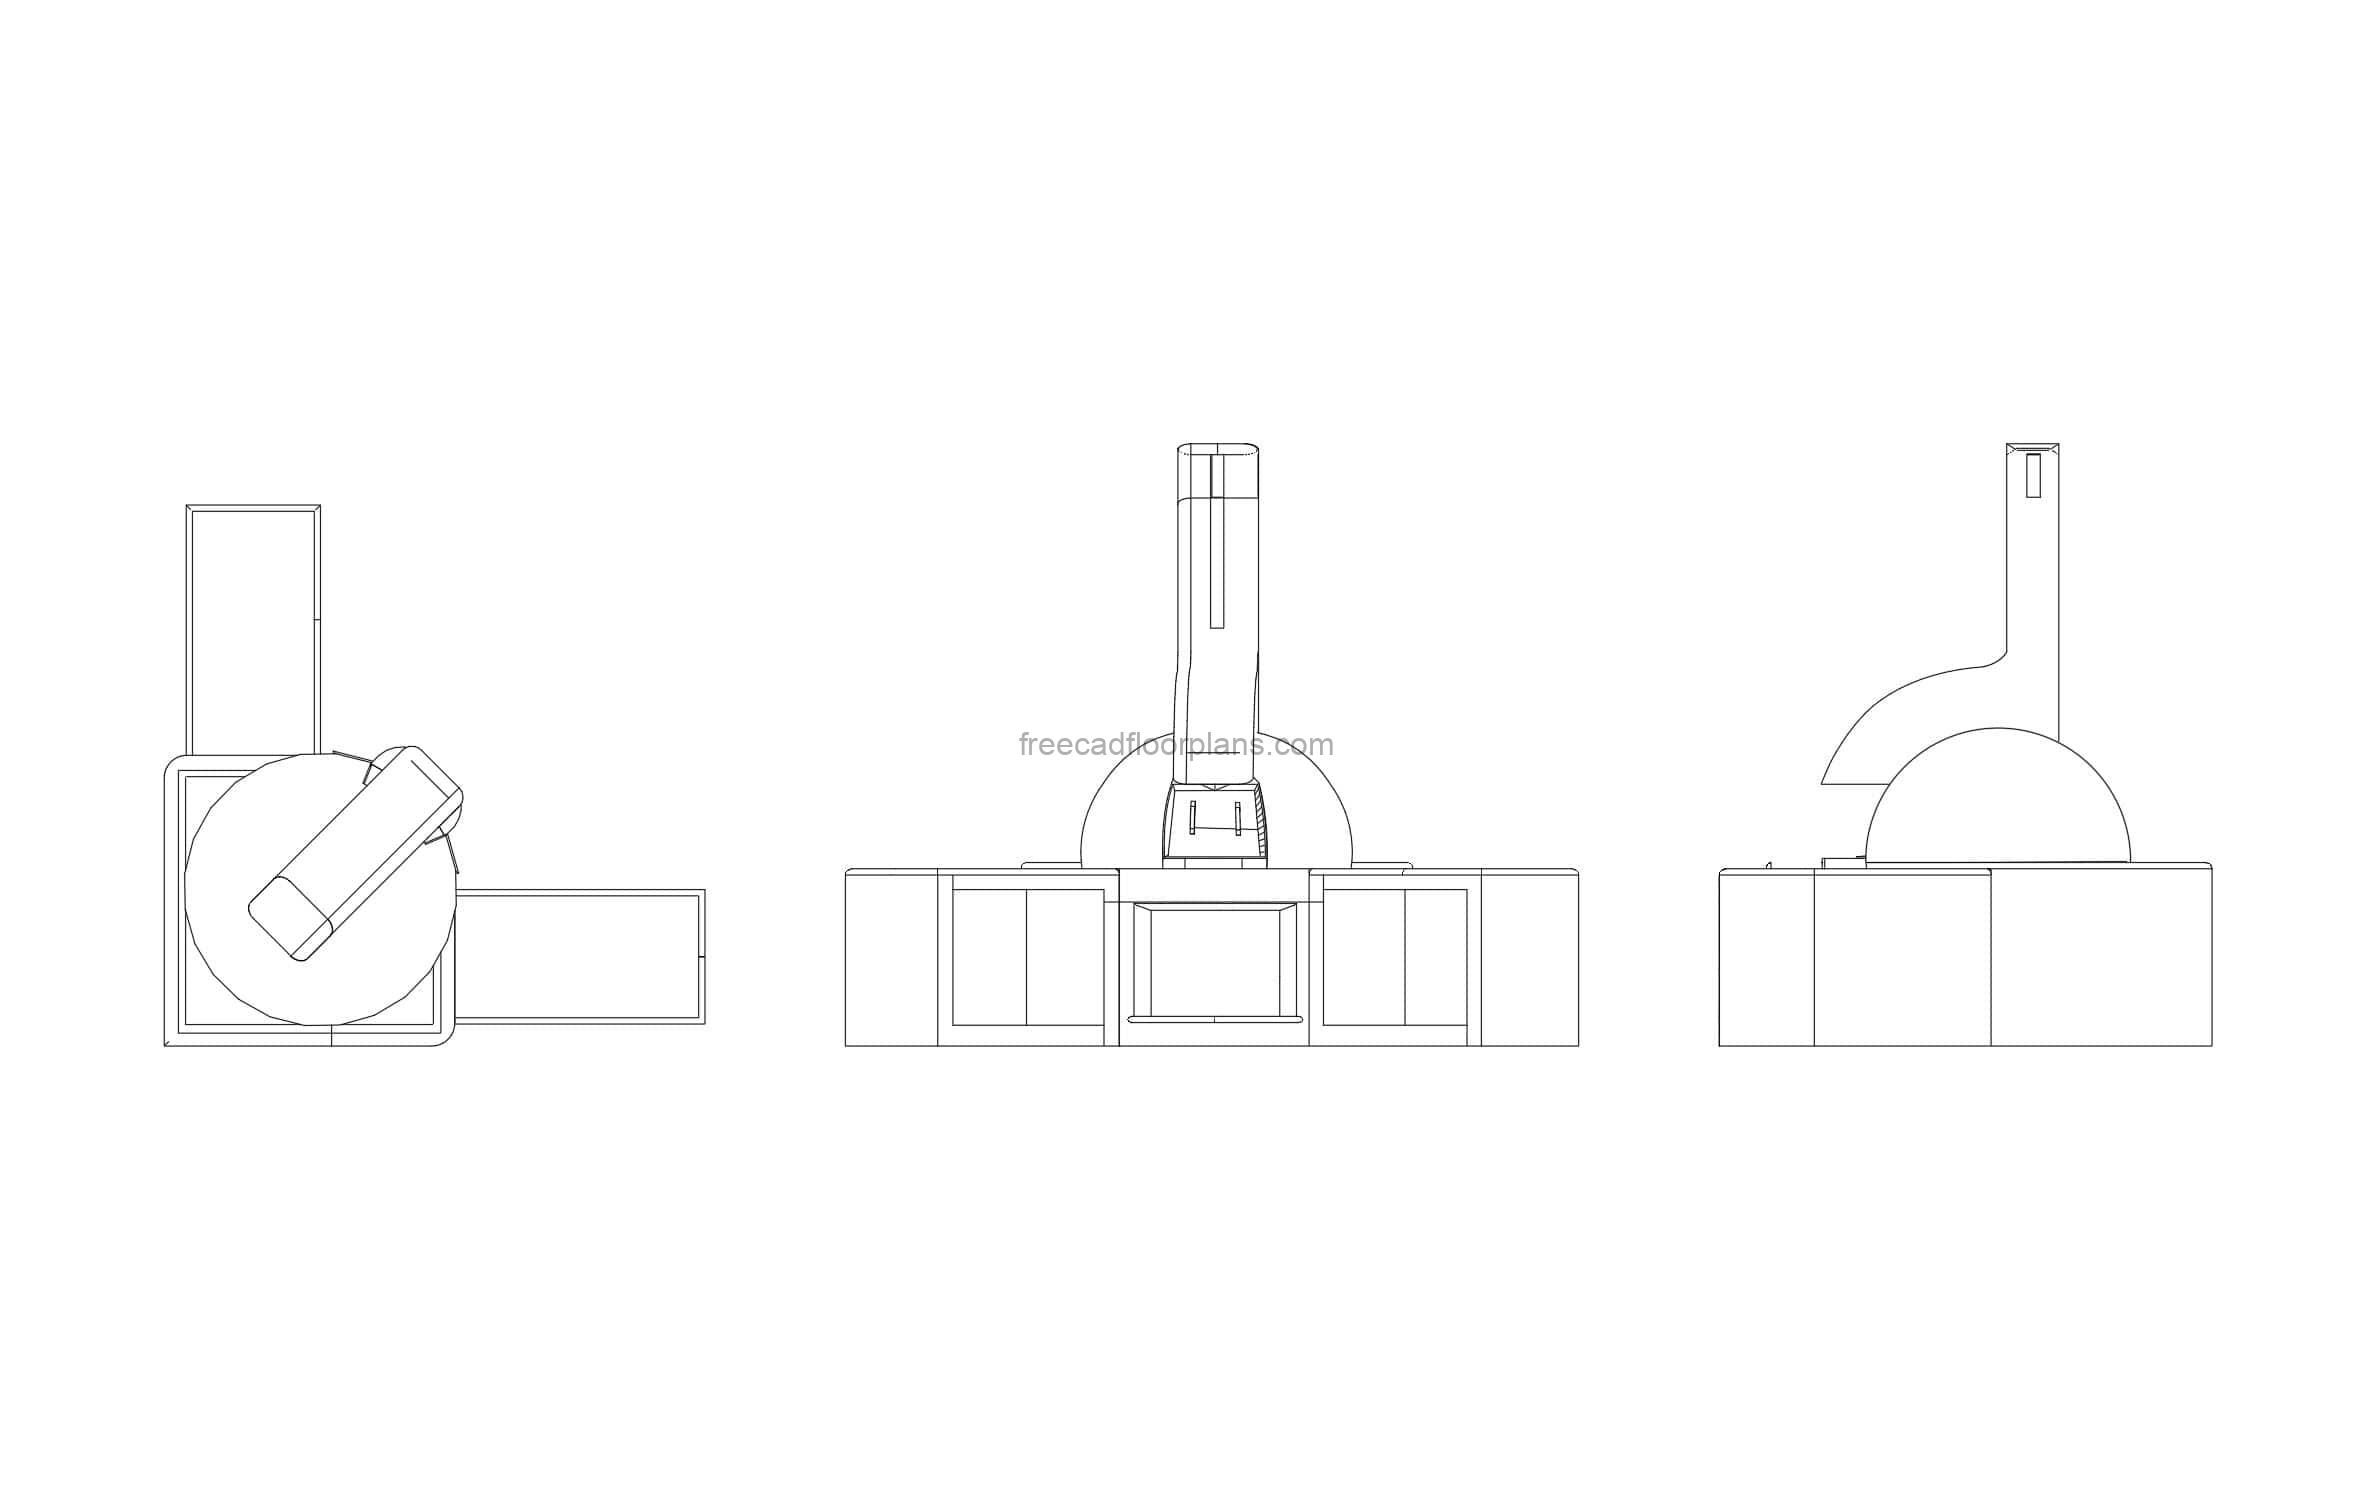 outdoor corner oven drawing in dwg format for free download